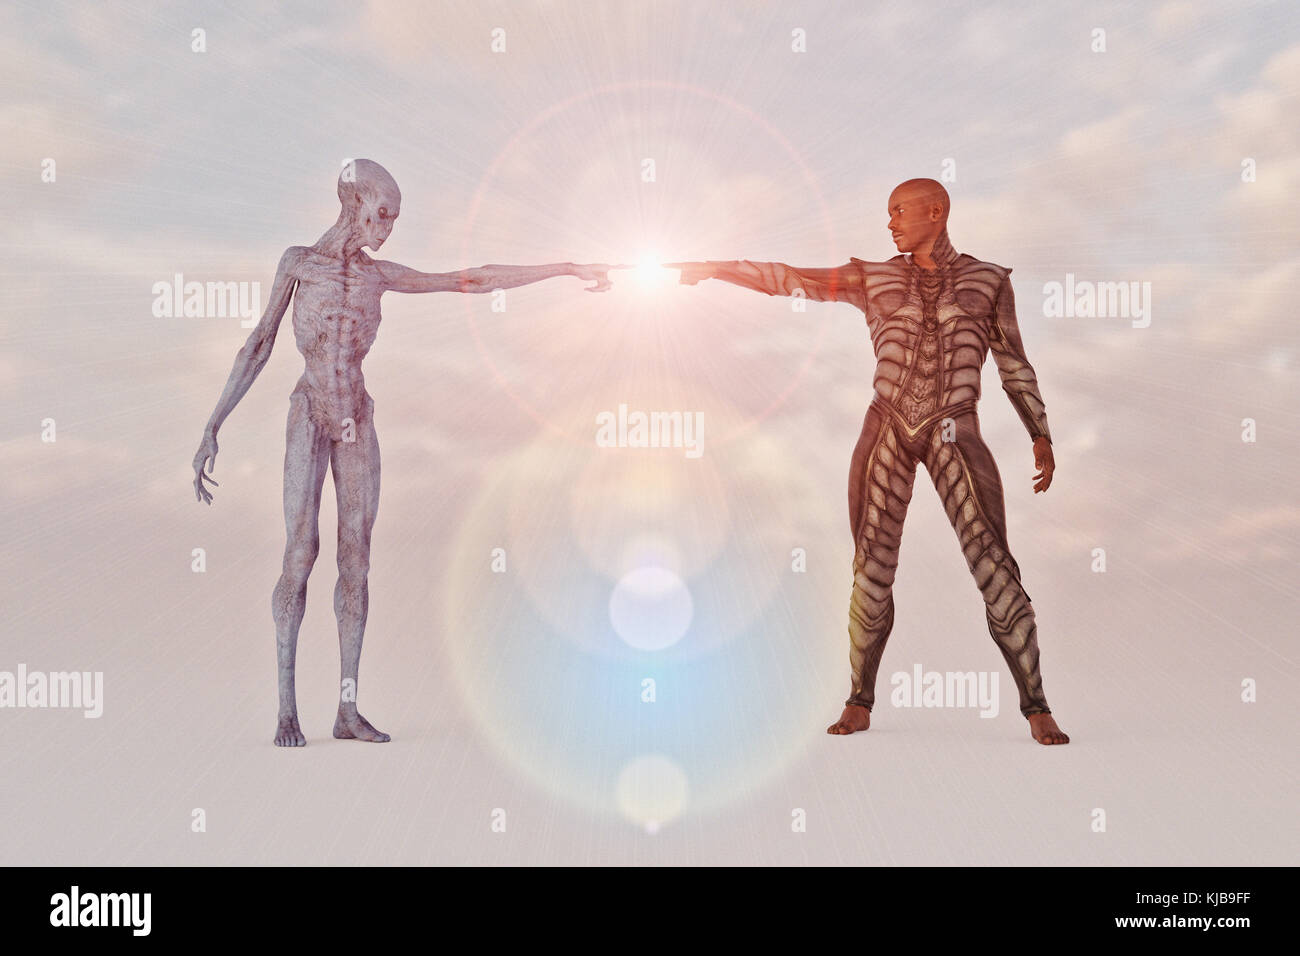 Man and alien touching glowing fingers Stock Photo